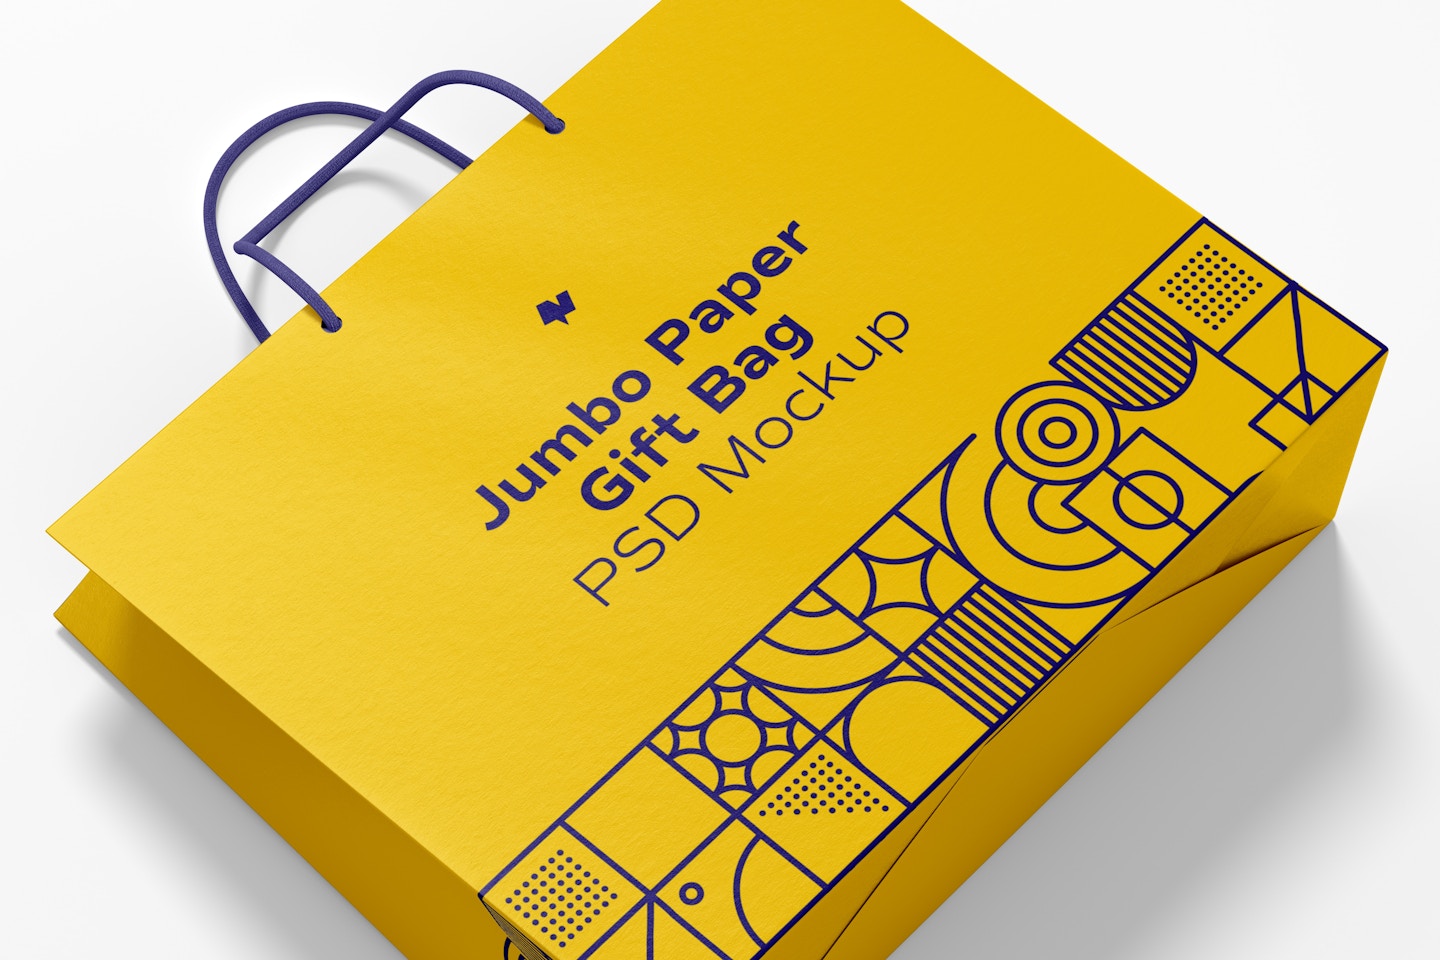 Jumbo Paper Gift Bag With Rope Handle Mockup, Close Up